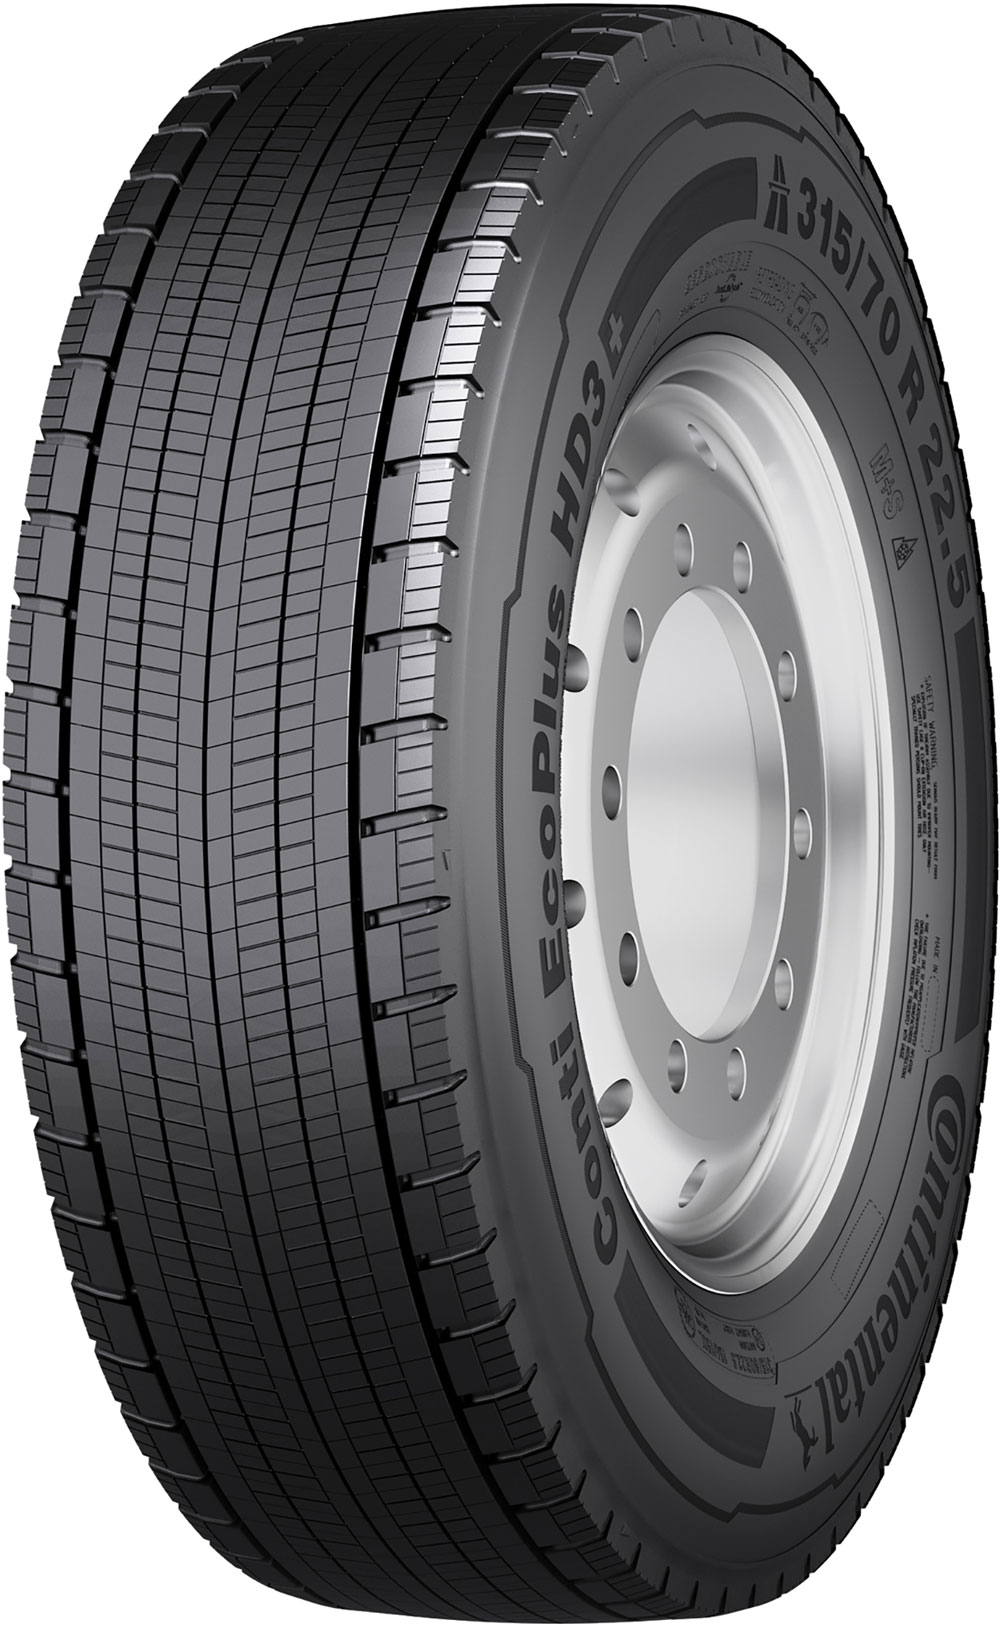 product_type-heavy_tires CONTINENTAL EcoPlus HD3 (CED3+) 20PR 315/70 R22.5 154L